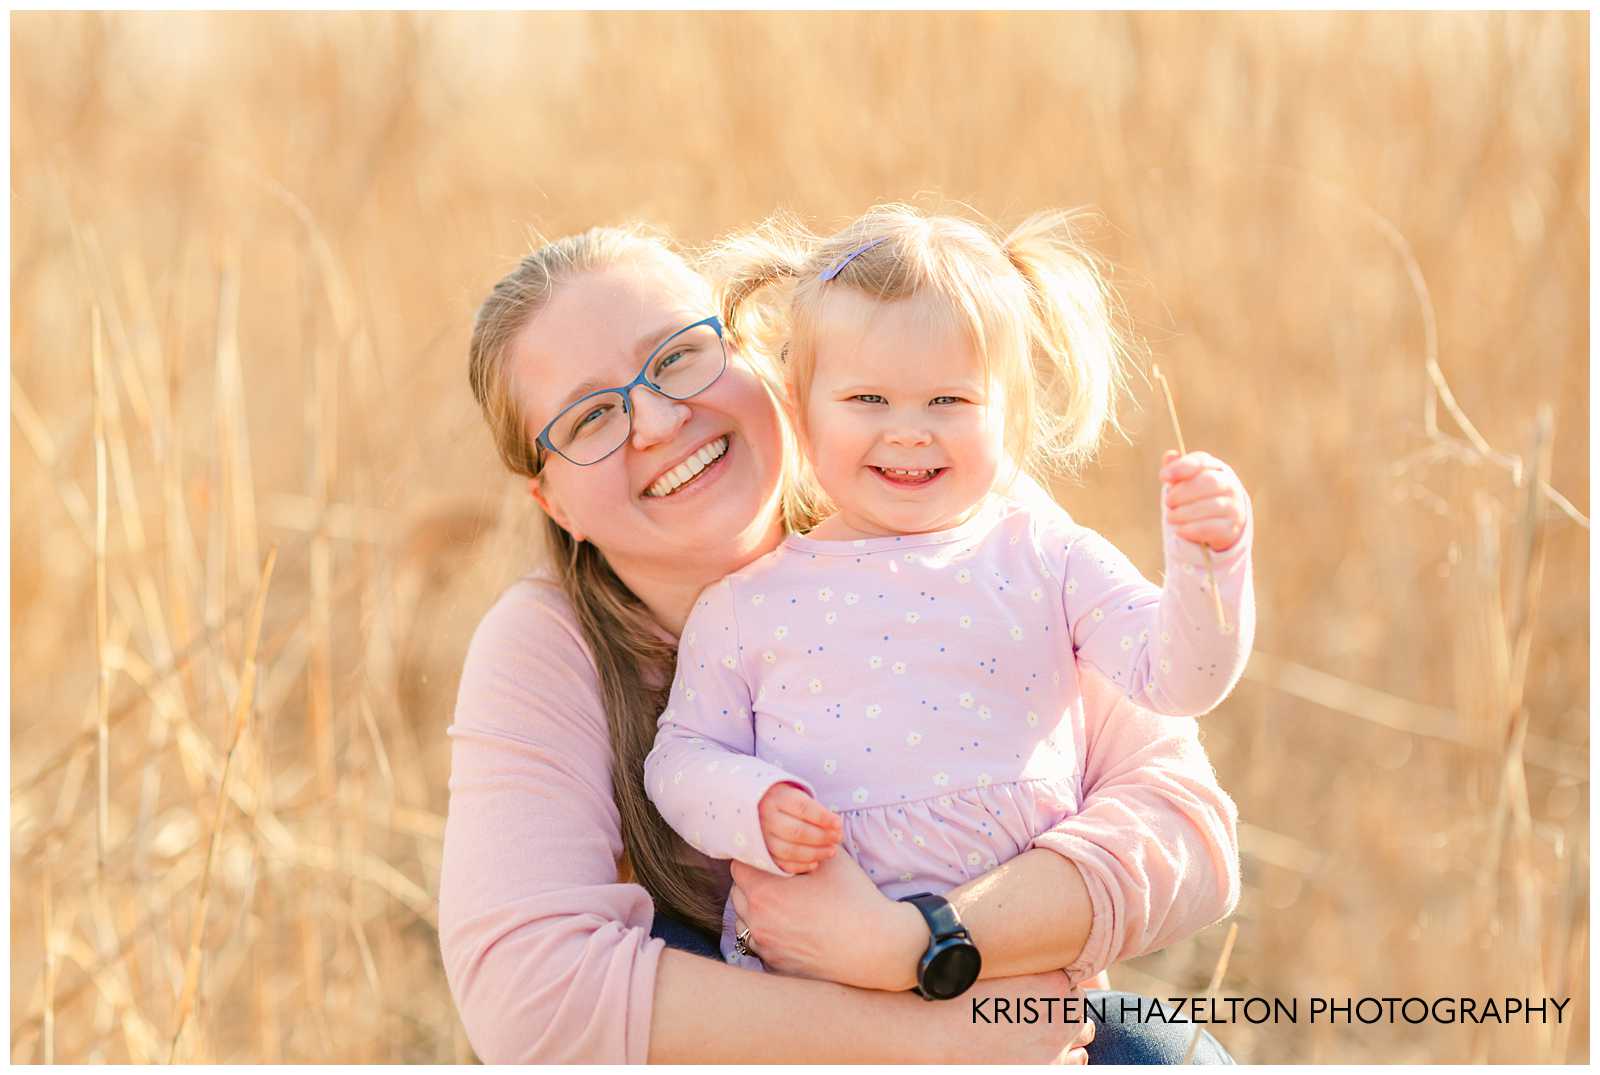 Forest Park family photography; mom and toddler daughter in a field of yellow grass.